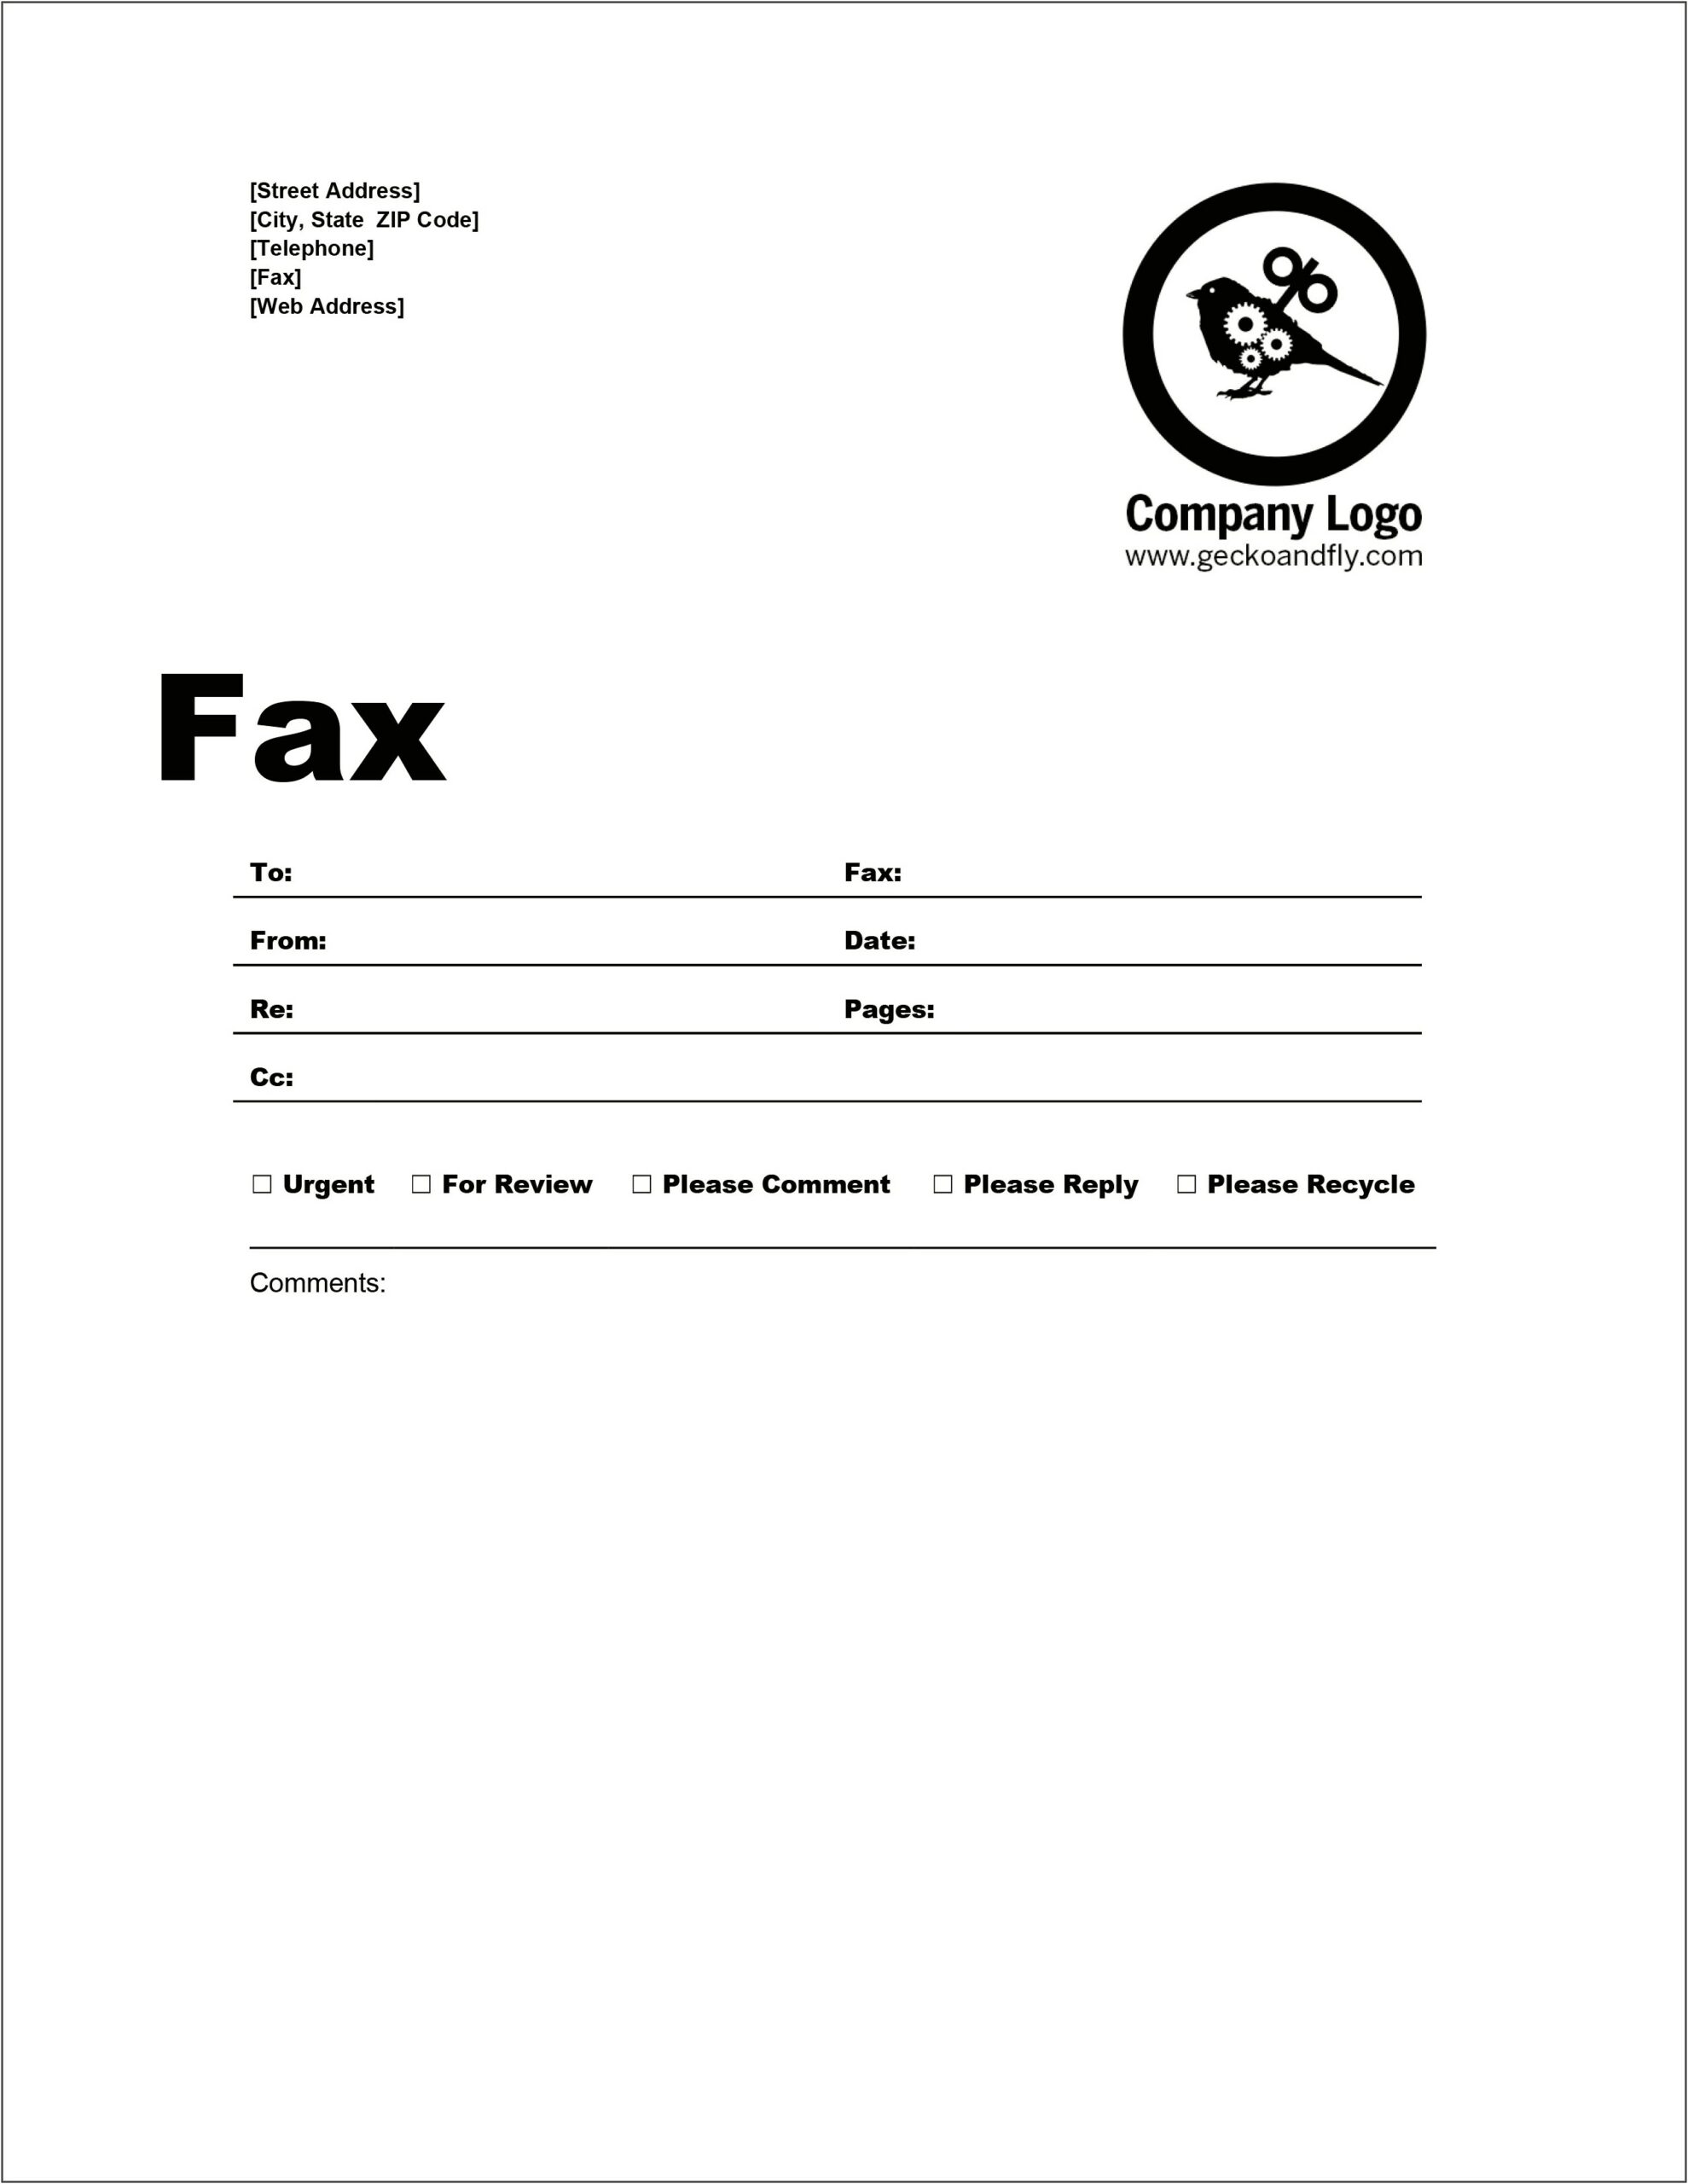 Creating A Fax Template In Word 2010